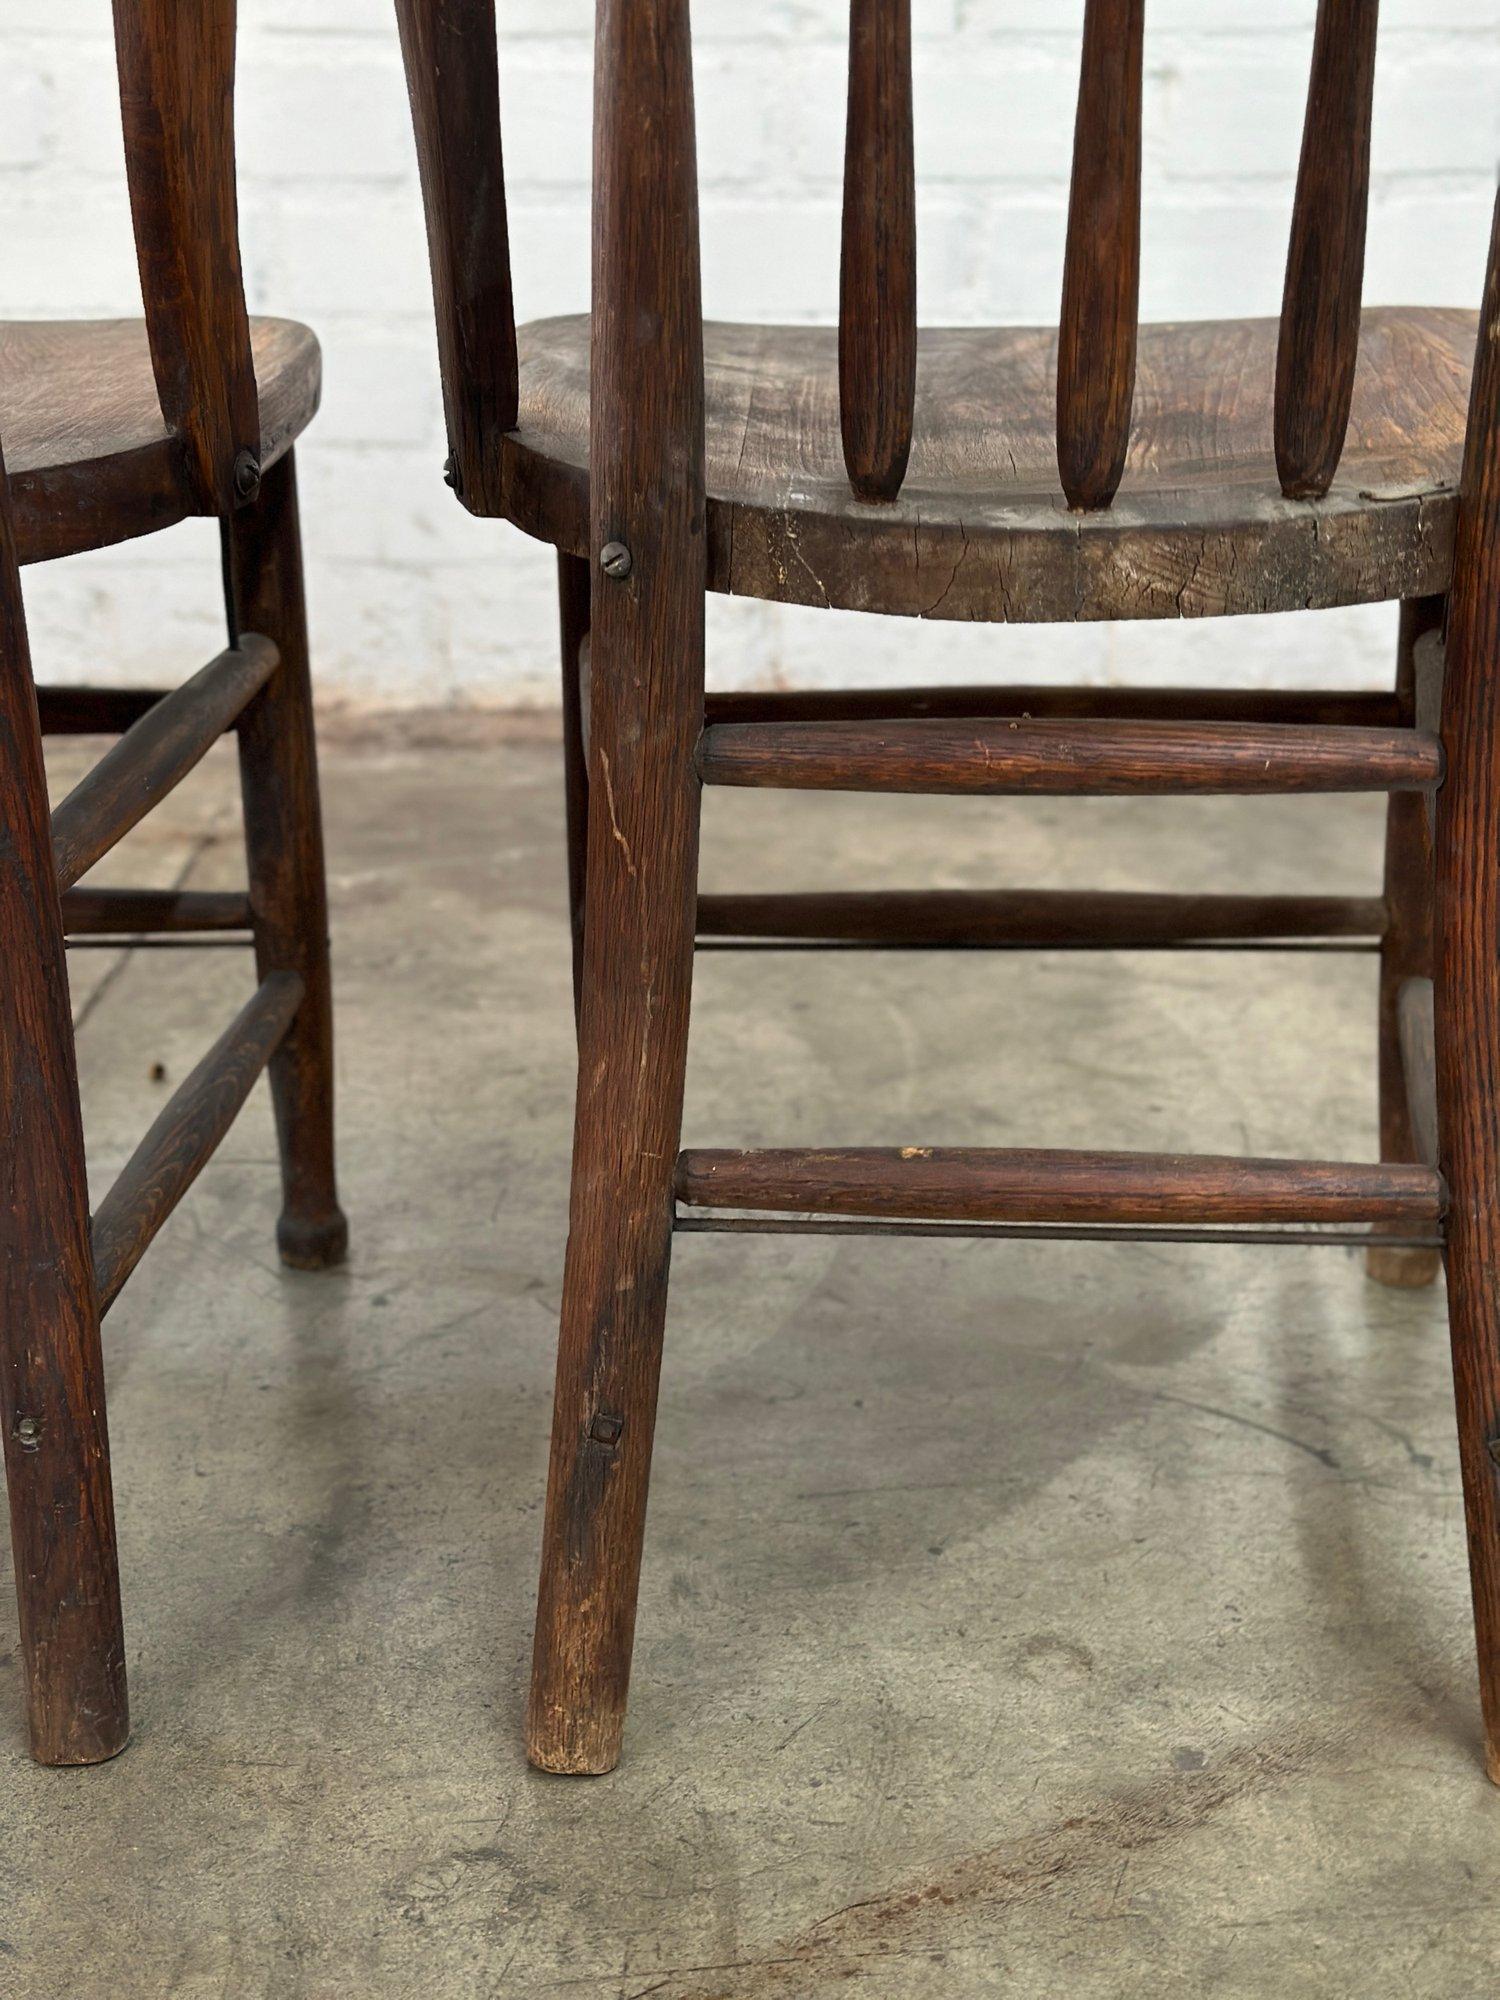 Vintage Farmhouse Spindle Chairs 4